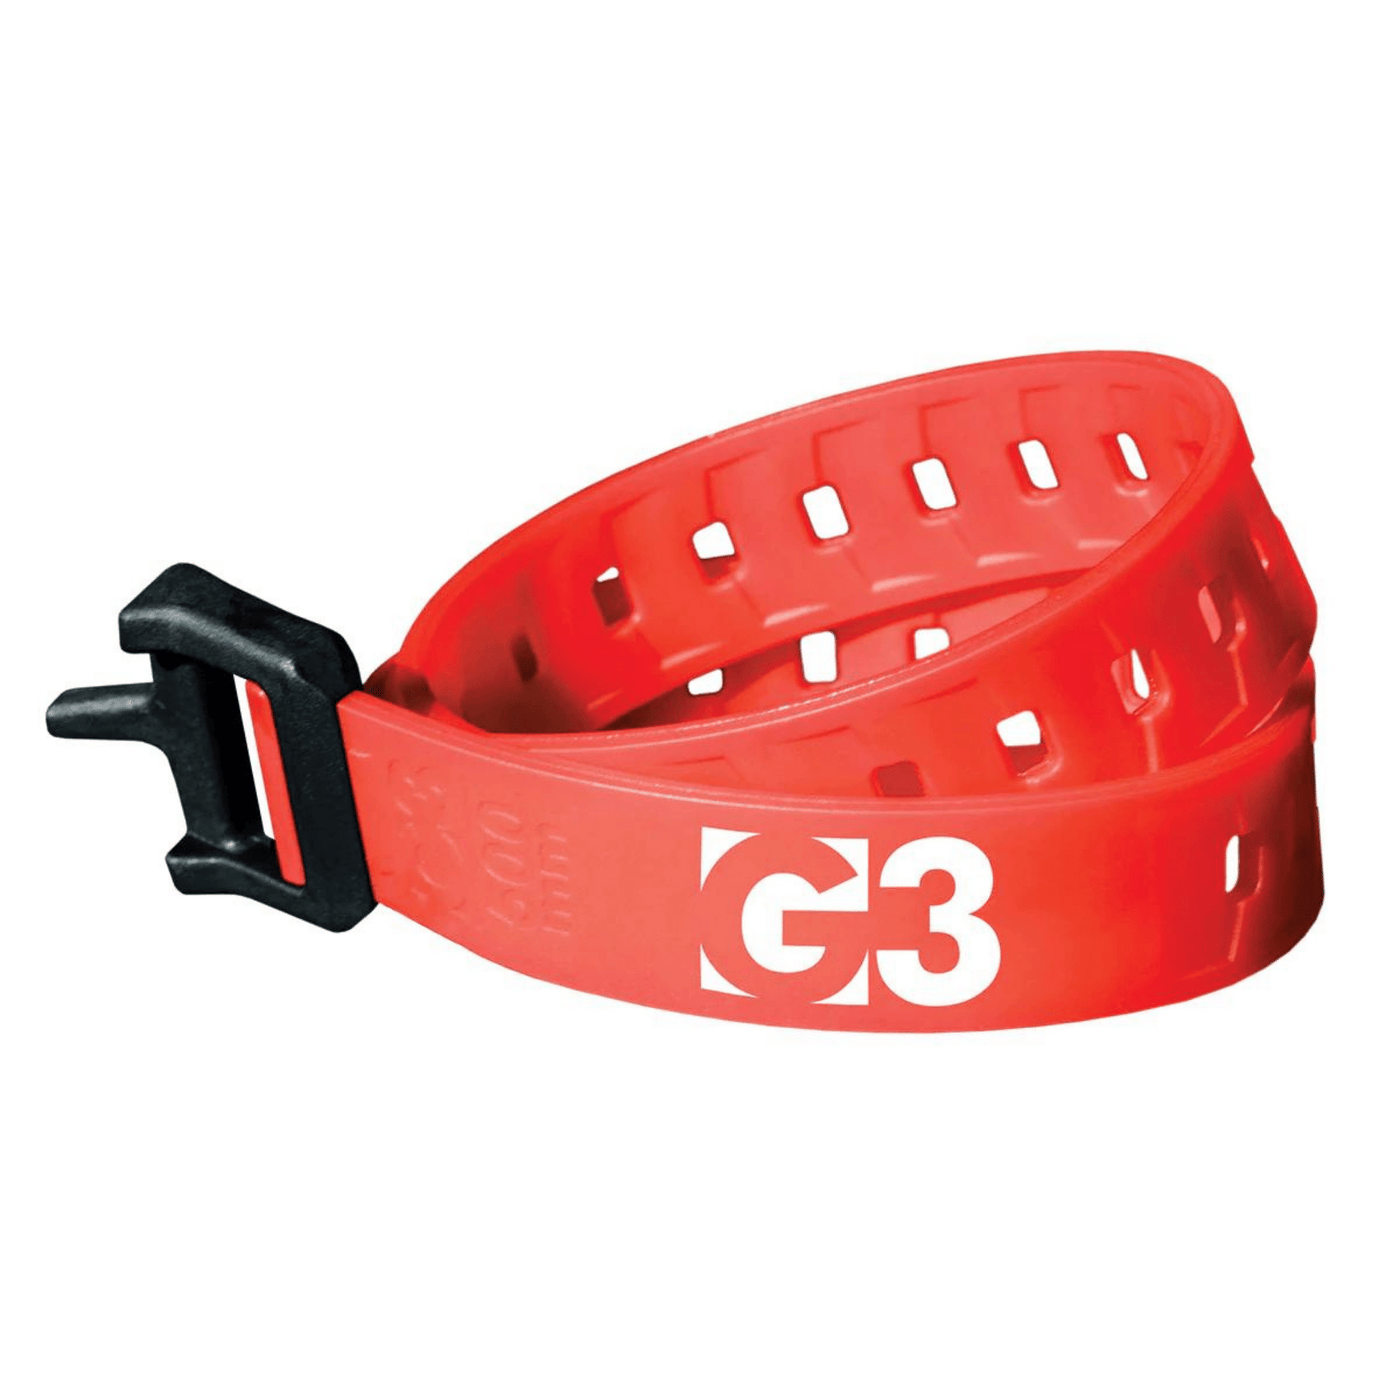 G3 Ski Strap - 400mm | Backcountry & Skiing Gear | Further Faster Christchurch NZ #universal-red